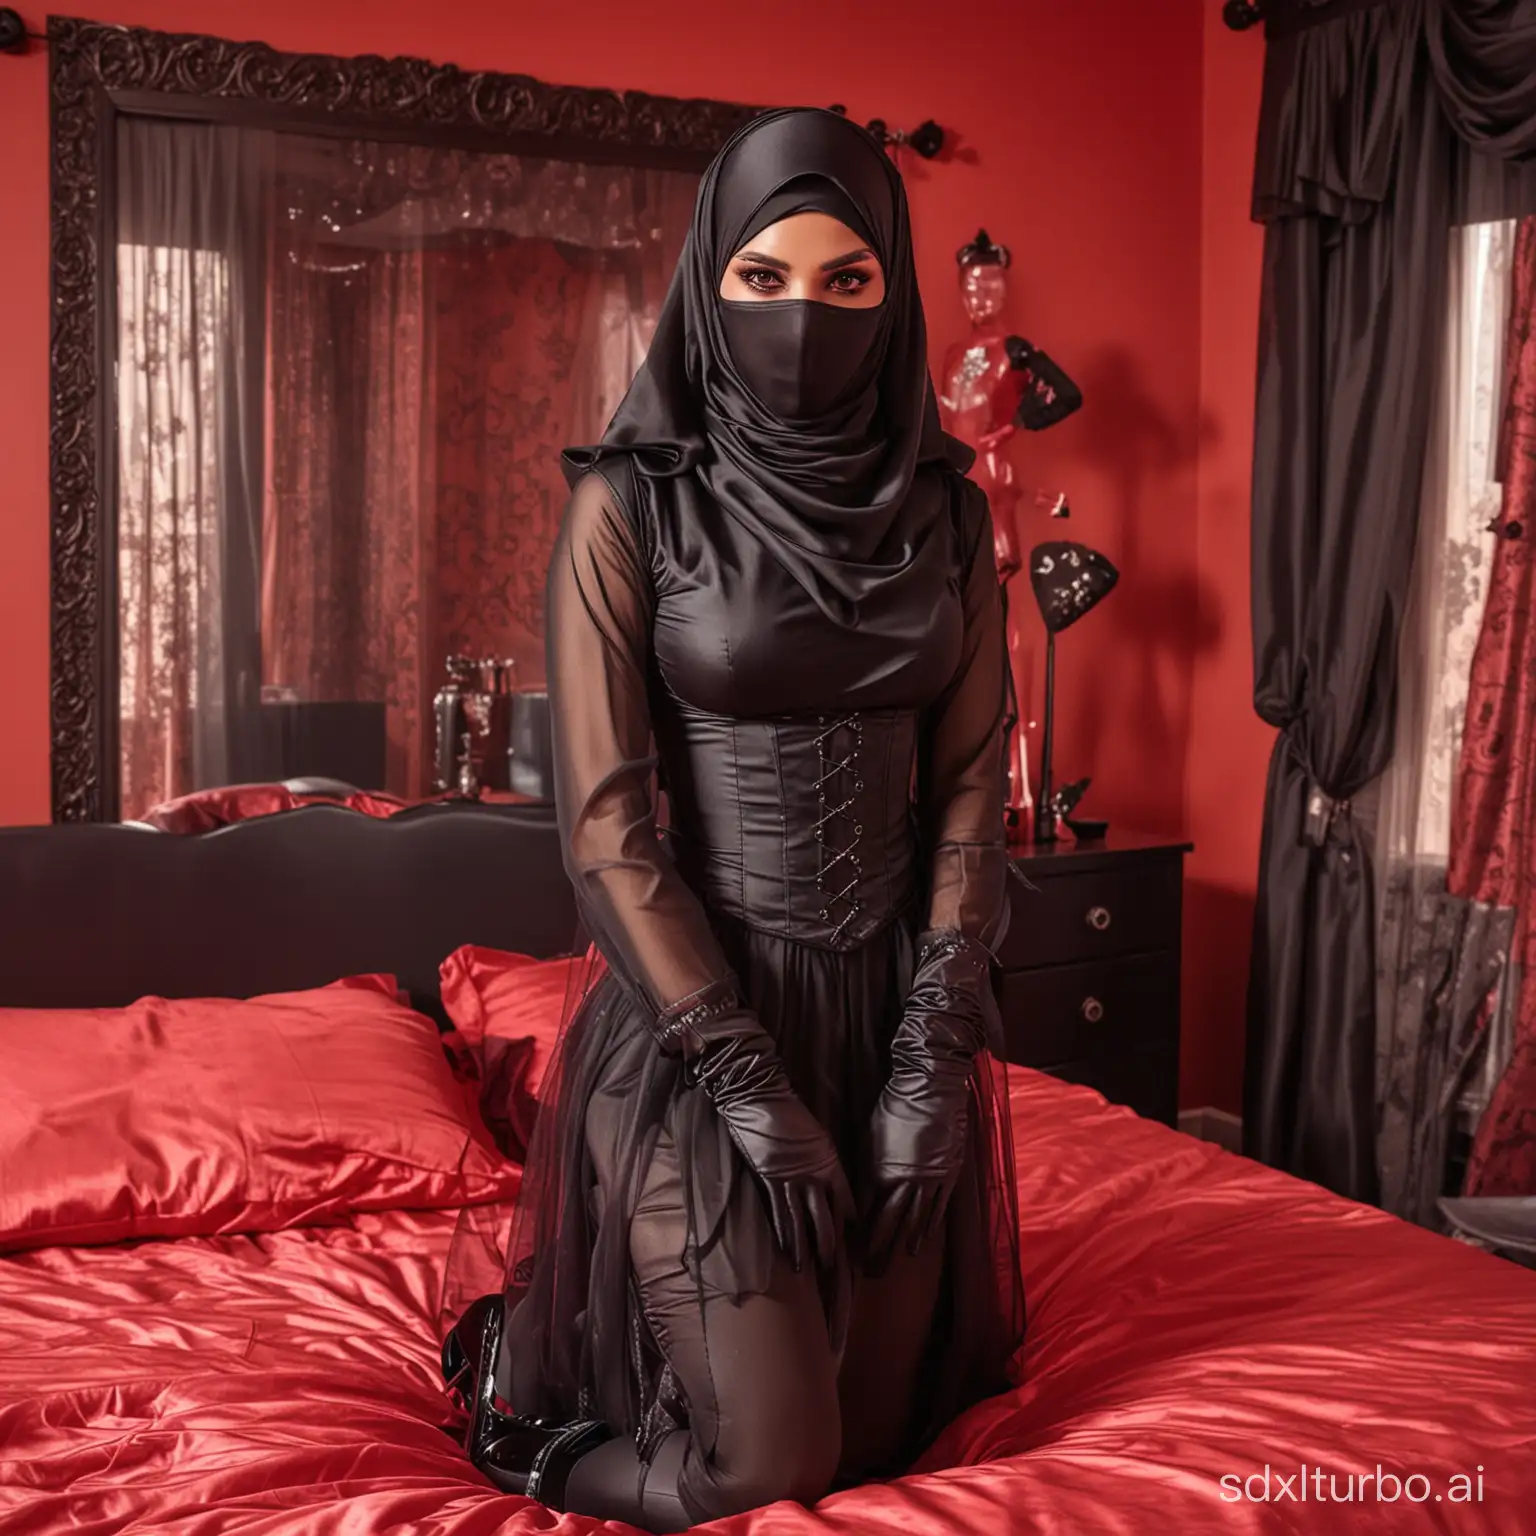 beautiful transform man sissy with black complete hijab, corset under hijab, mask on bouth, black shoes and gloves. transparent veil over the eyes.
in red bedroom.